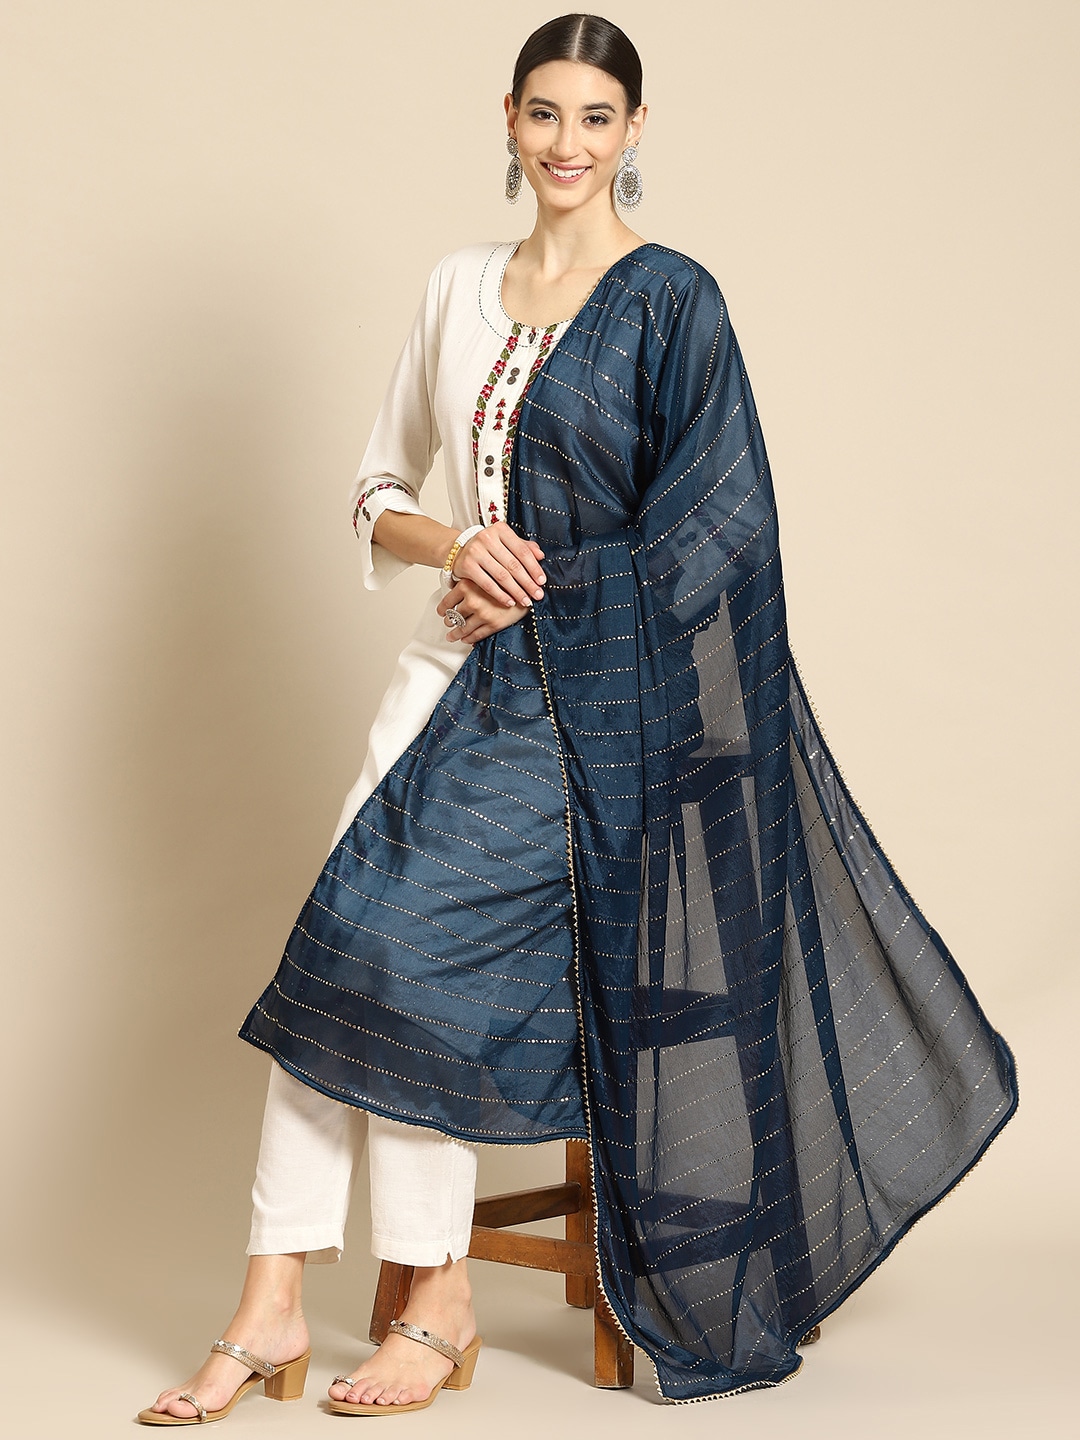 Saadgi Teal Blue & Gold-Toned Ethnic Motifs Printed Dupatta with Mukaish Price in India